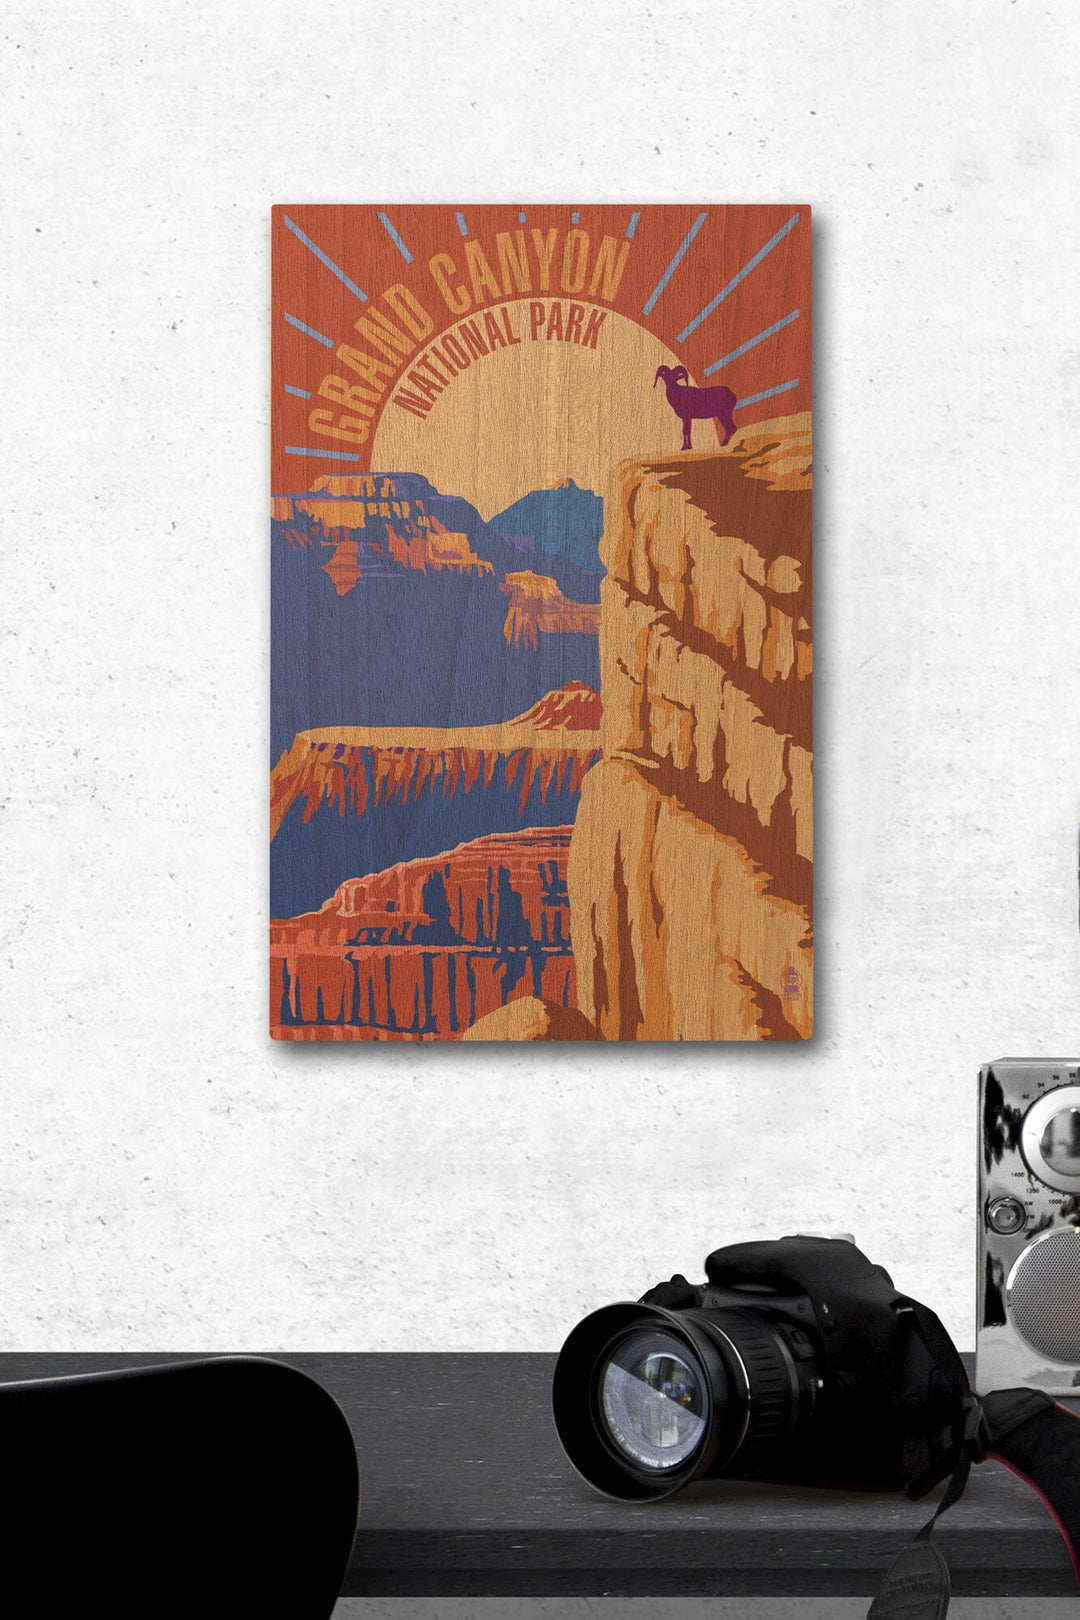 Grand Canyon National Park, Psychedelic, Lantern Press Poster, Wood Signs and Postcards Wood Lantern Press 12 x 18 Wood Gallery Print 